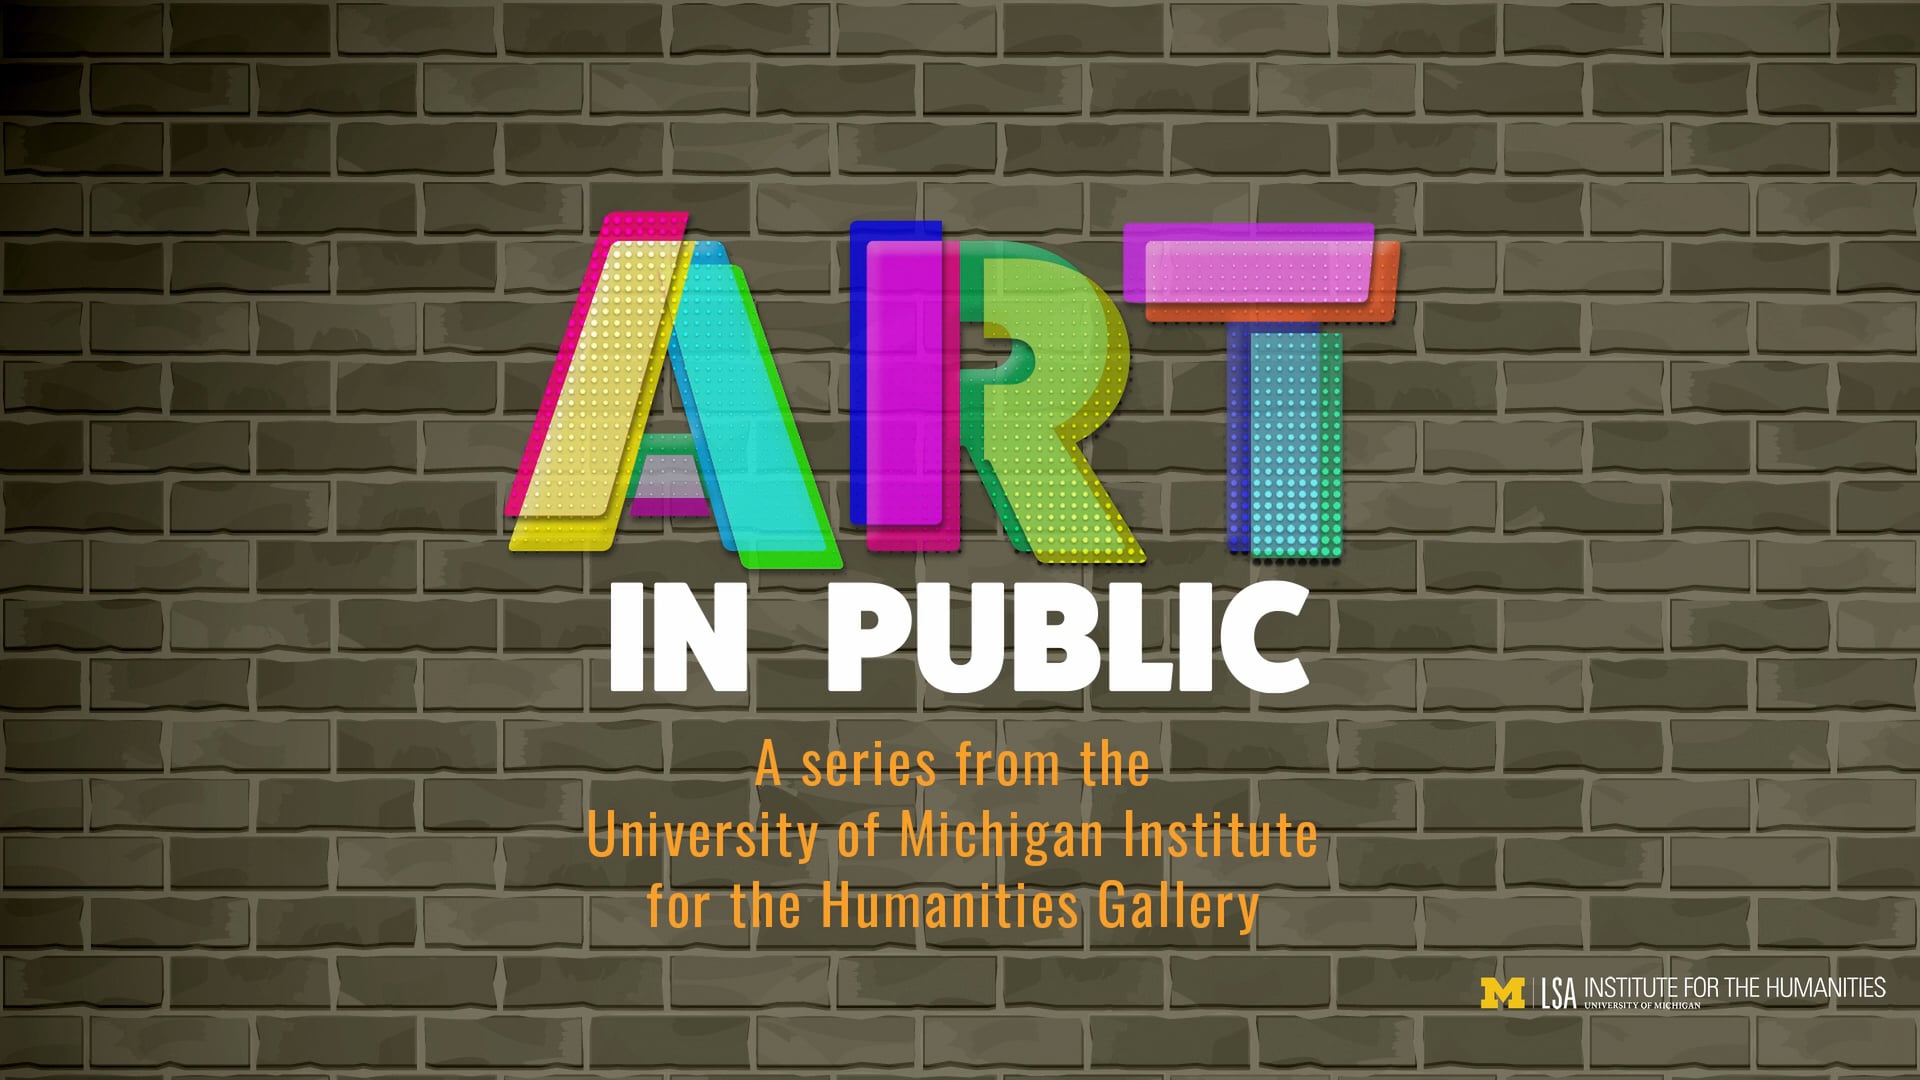 University Of Michigan Institute for the Humanities